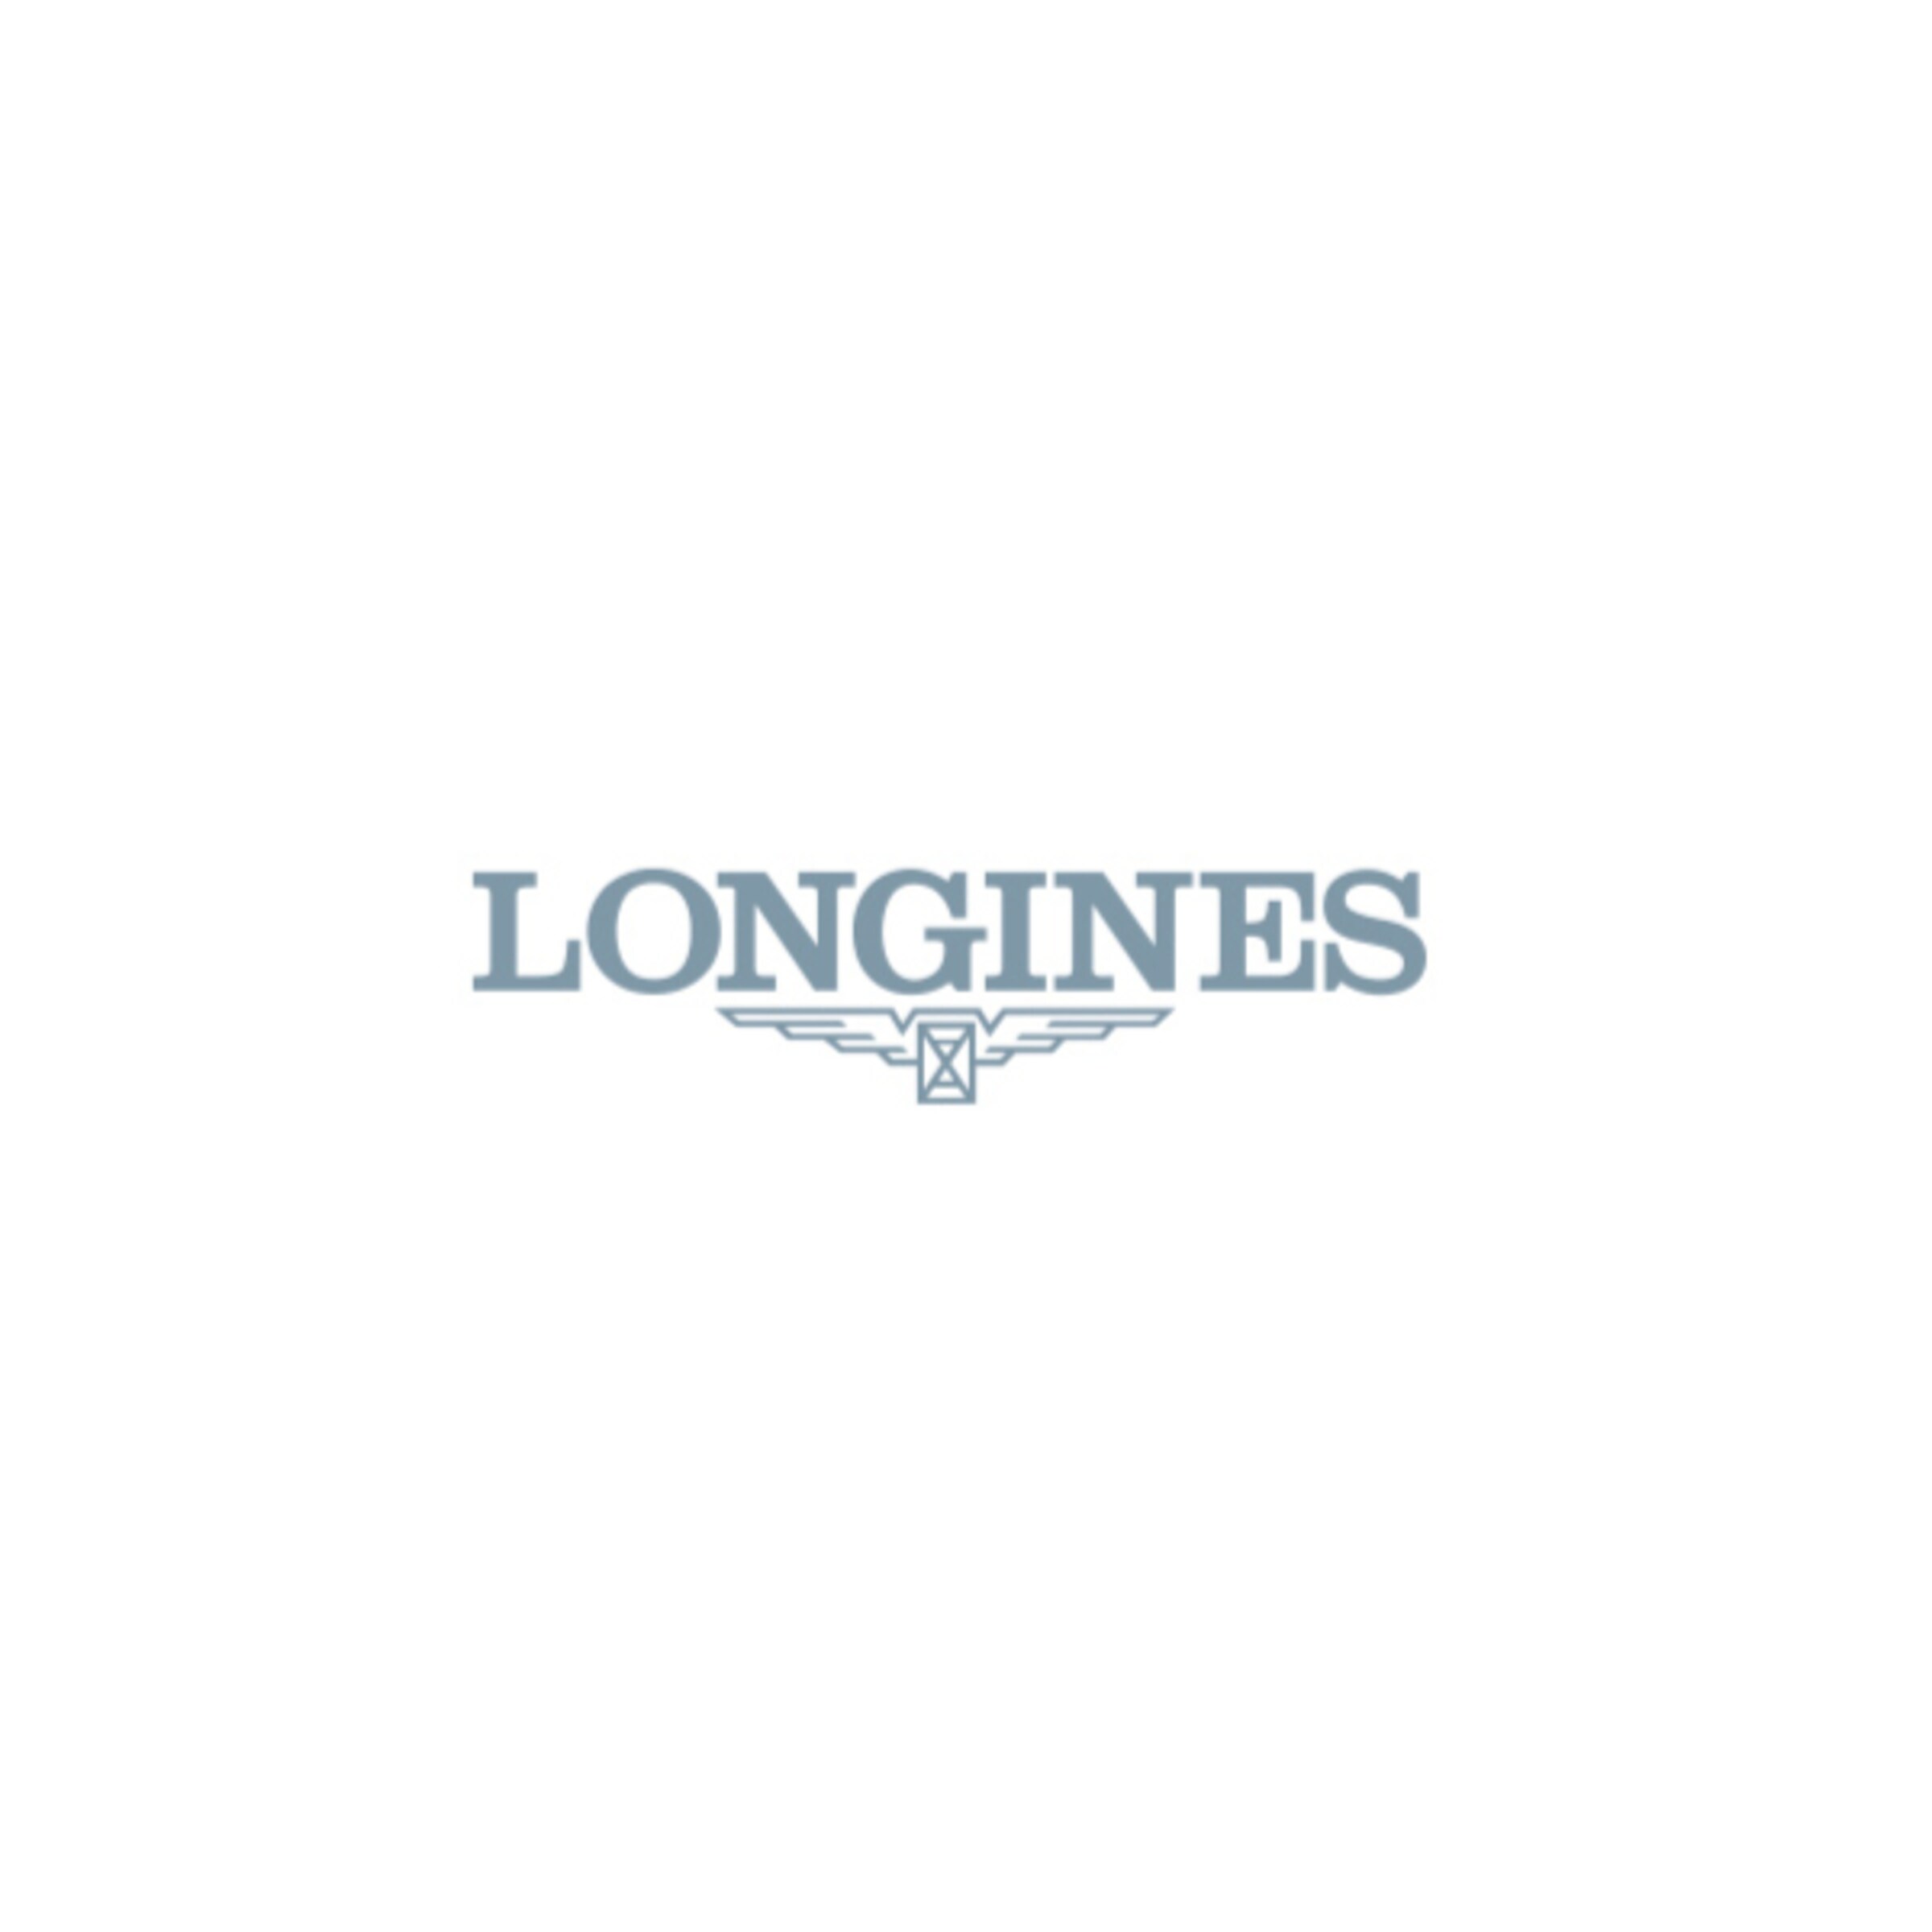 Longines THE LONGINES MASTER COLLECTION Automatic 18 karat pink gold Watch - L2.257.8.87.3